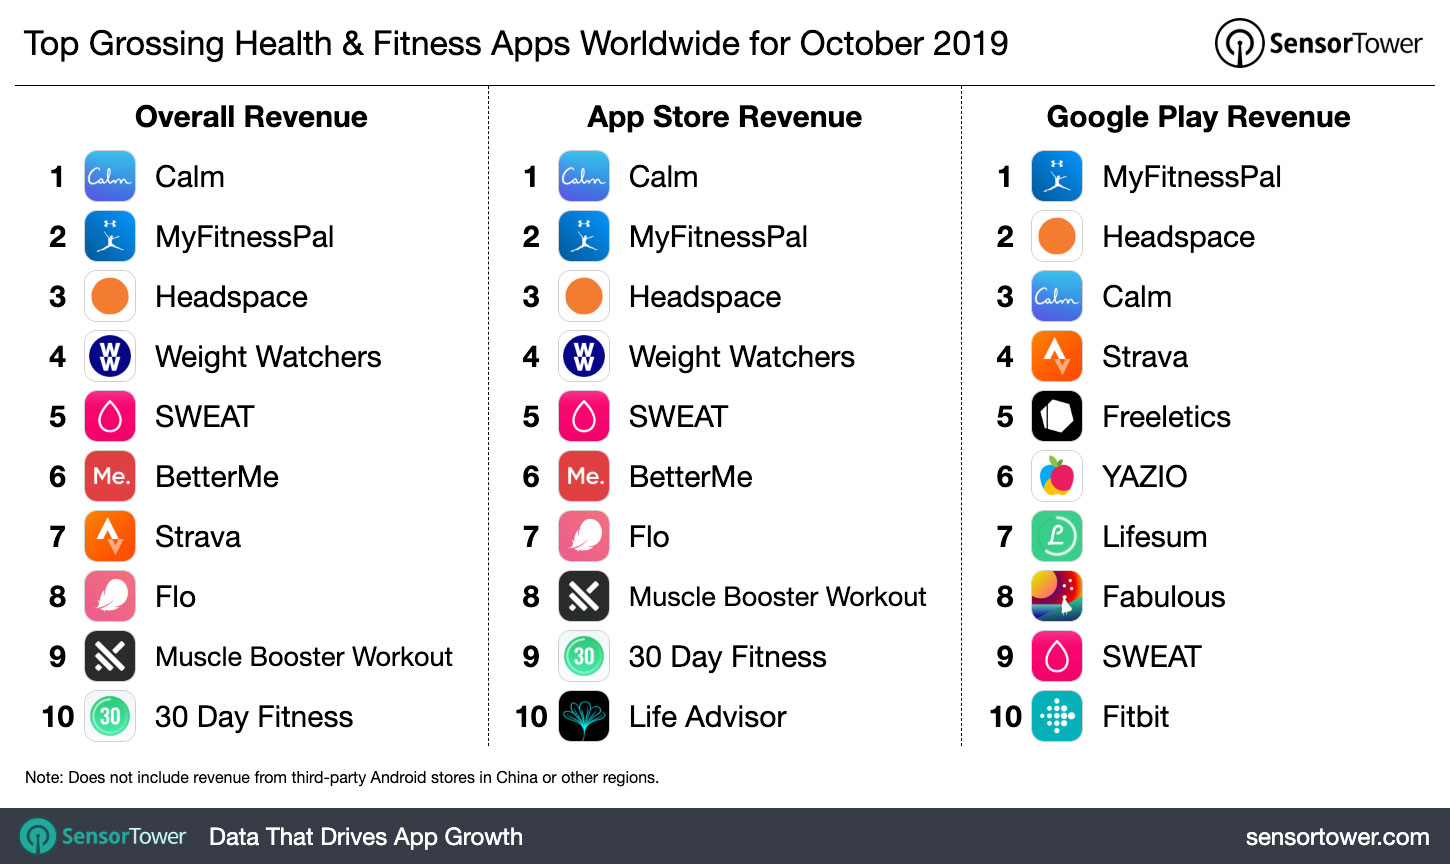 top-grossing-health-and-fitness-apps-worldwide-october-2019.jpg